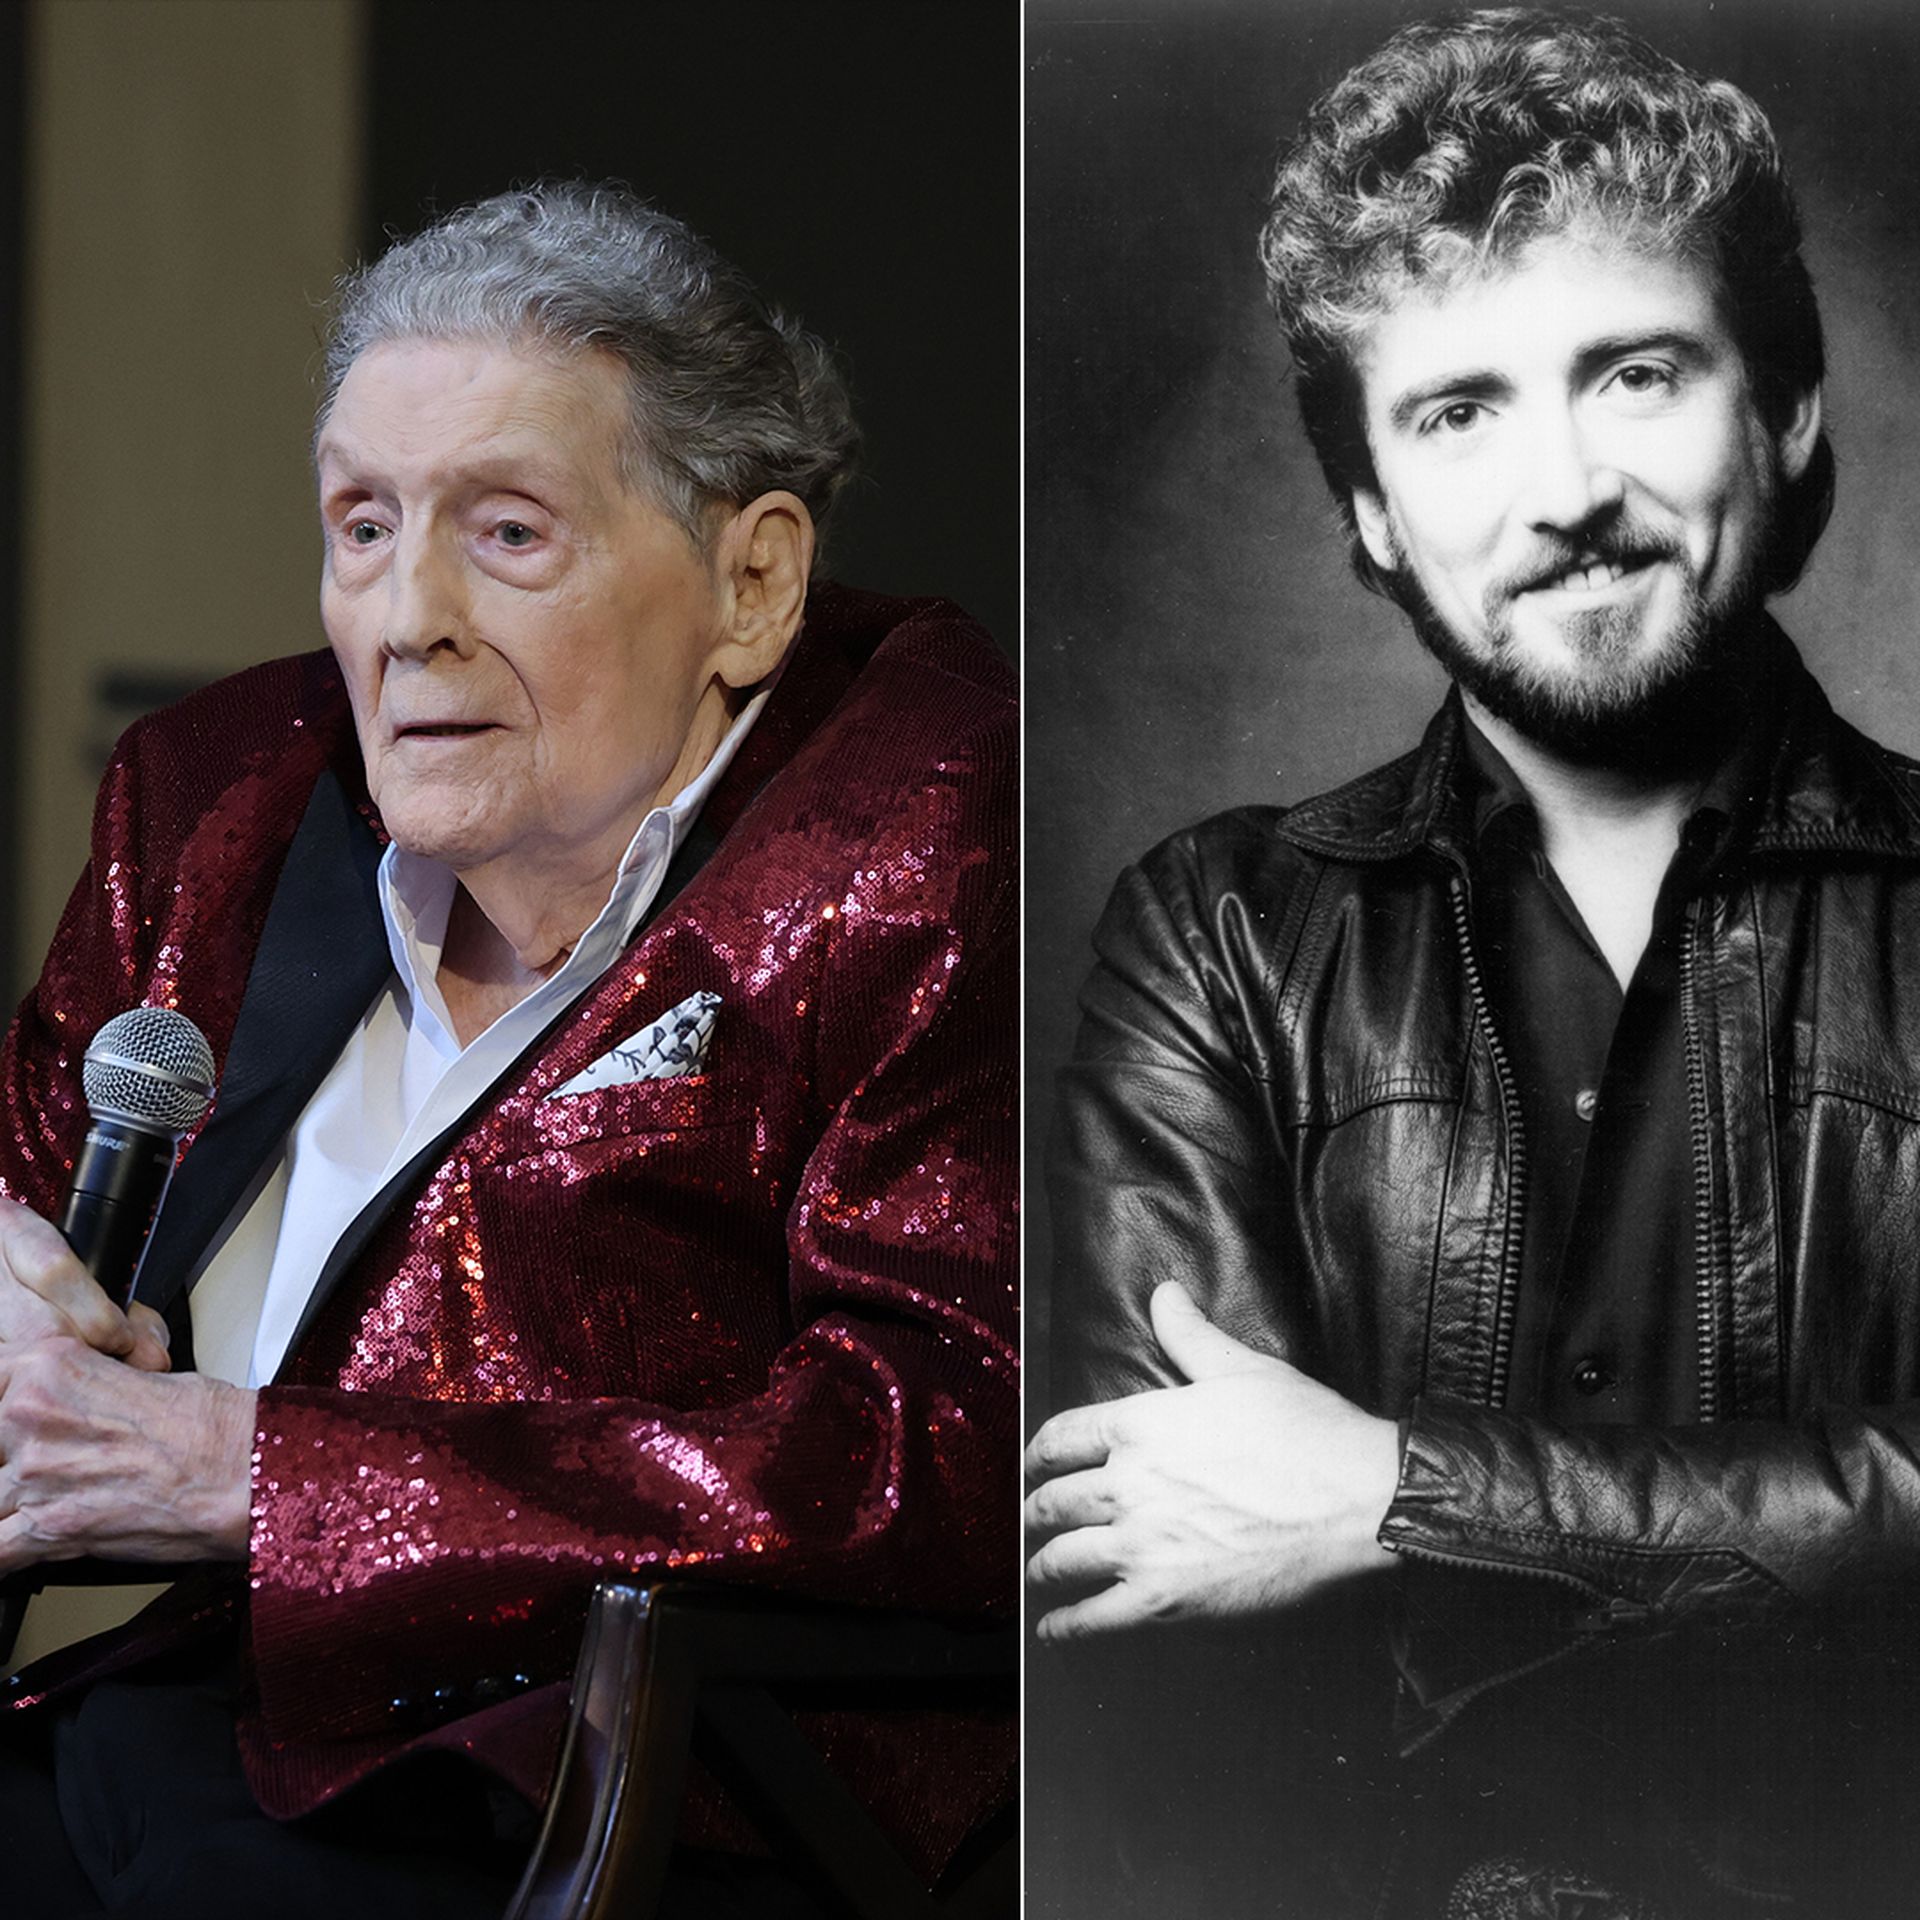 A composite image of executive Joe Galante, Jerry Lee Lewis and Keith Whitley